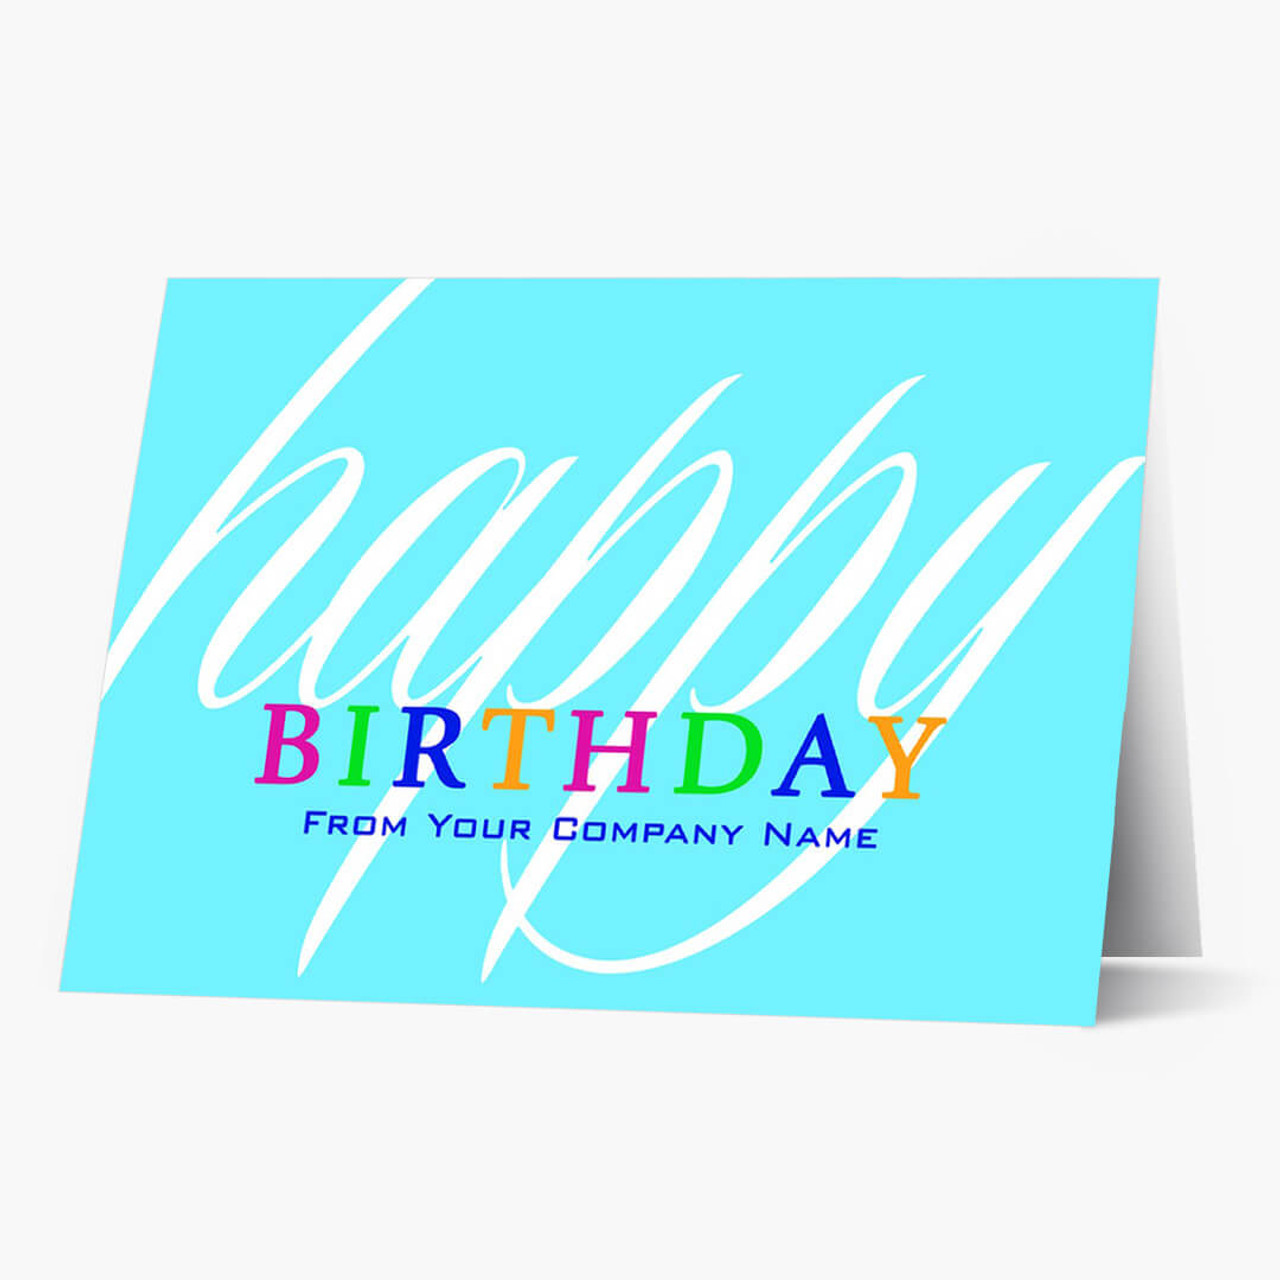 Colorful Birthday Wishes Card